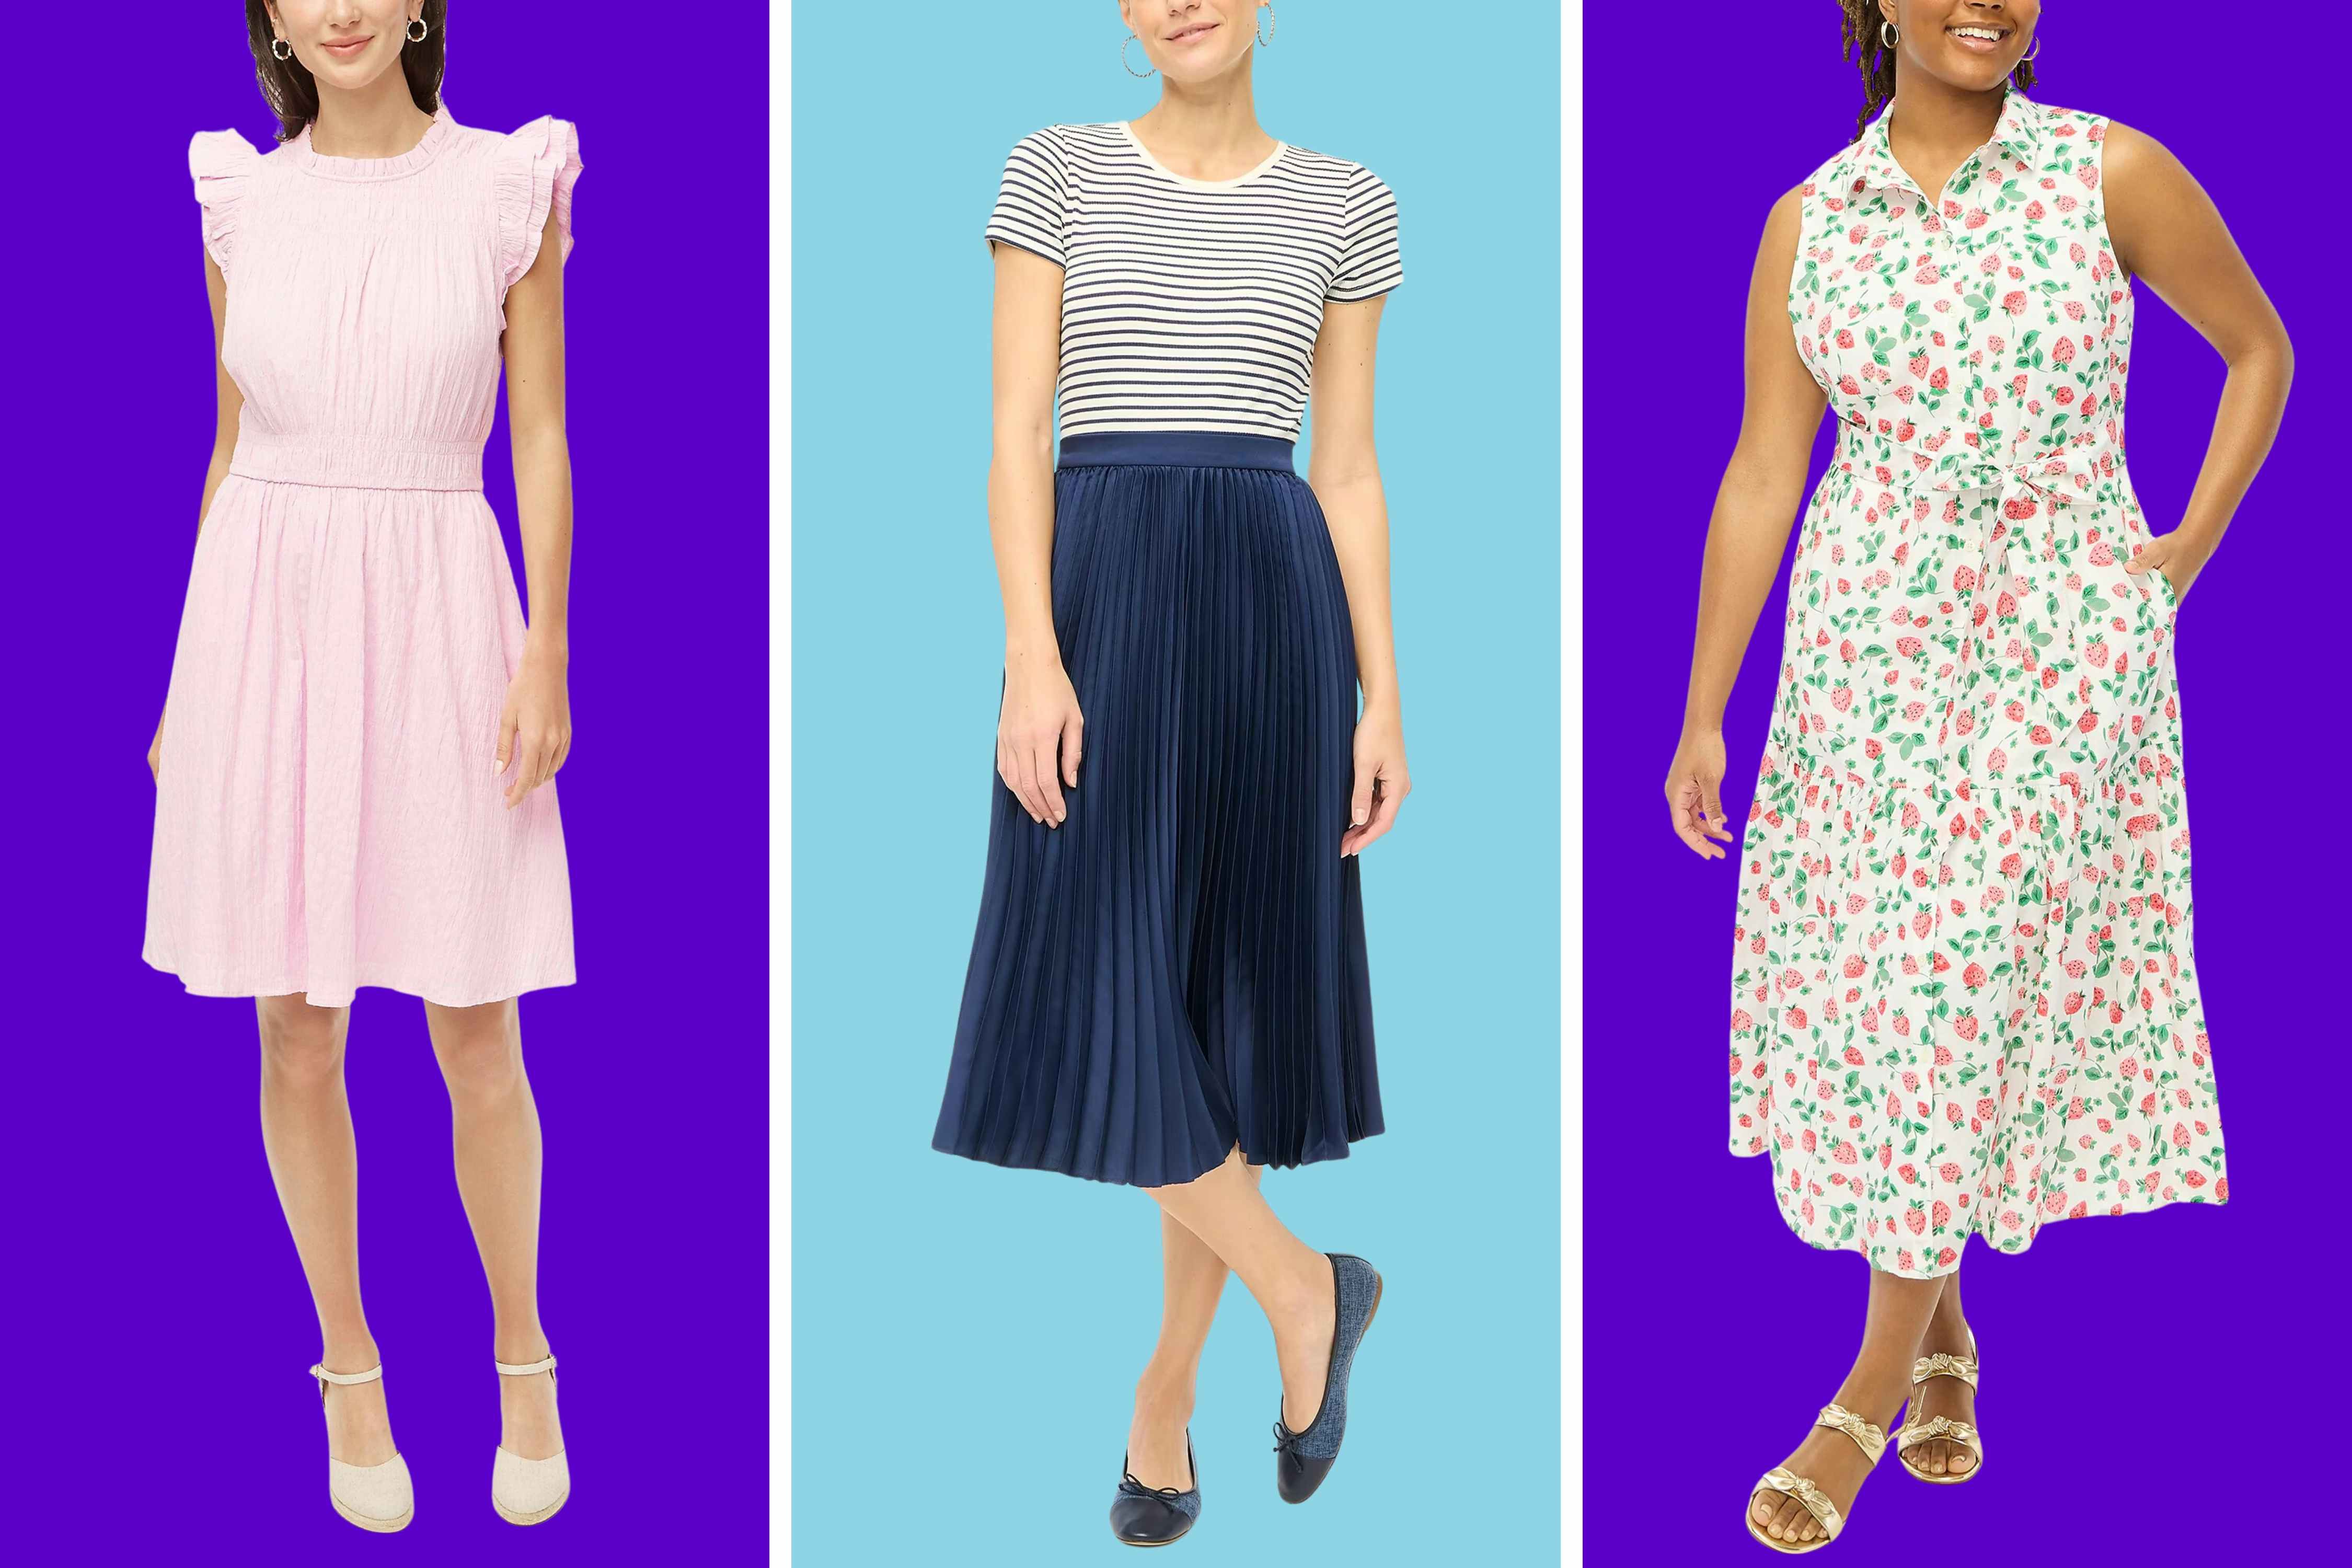 Extra 70% Off J.Crew Factory Clearance: $12 Shorts, $21 Dresses, and More